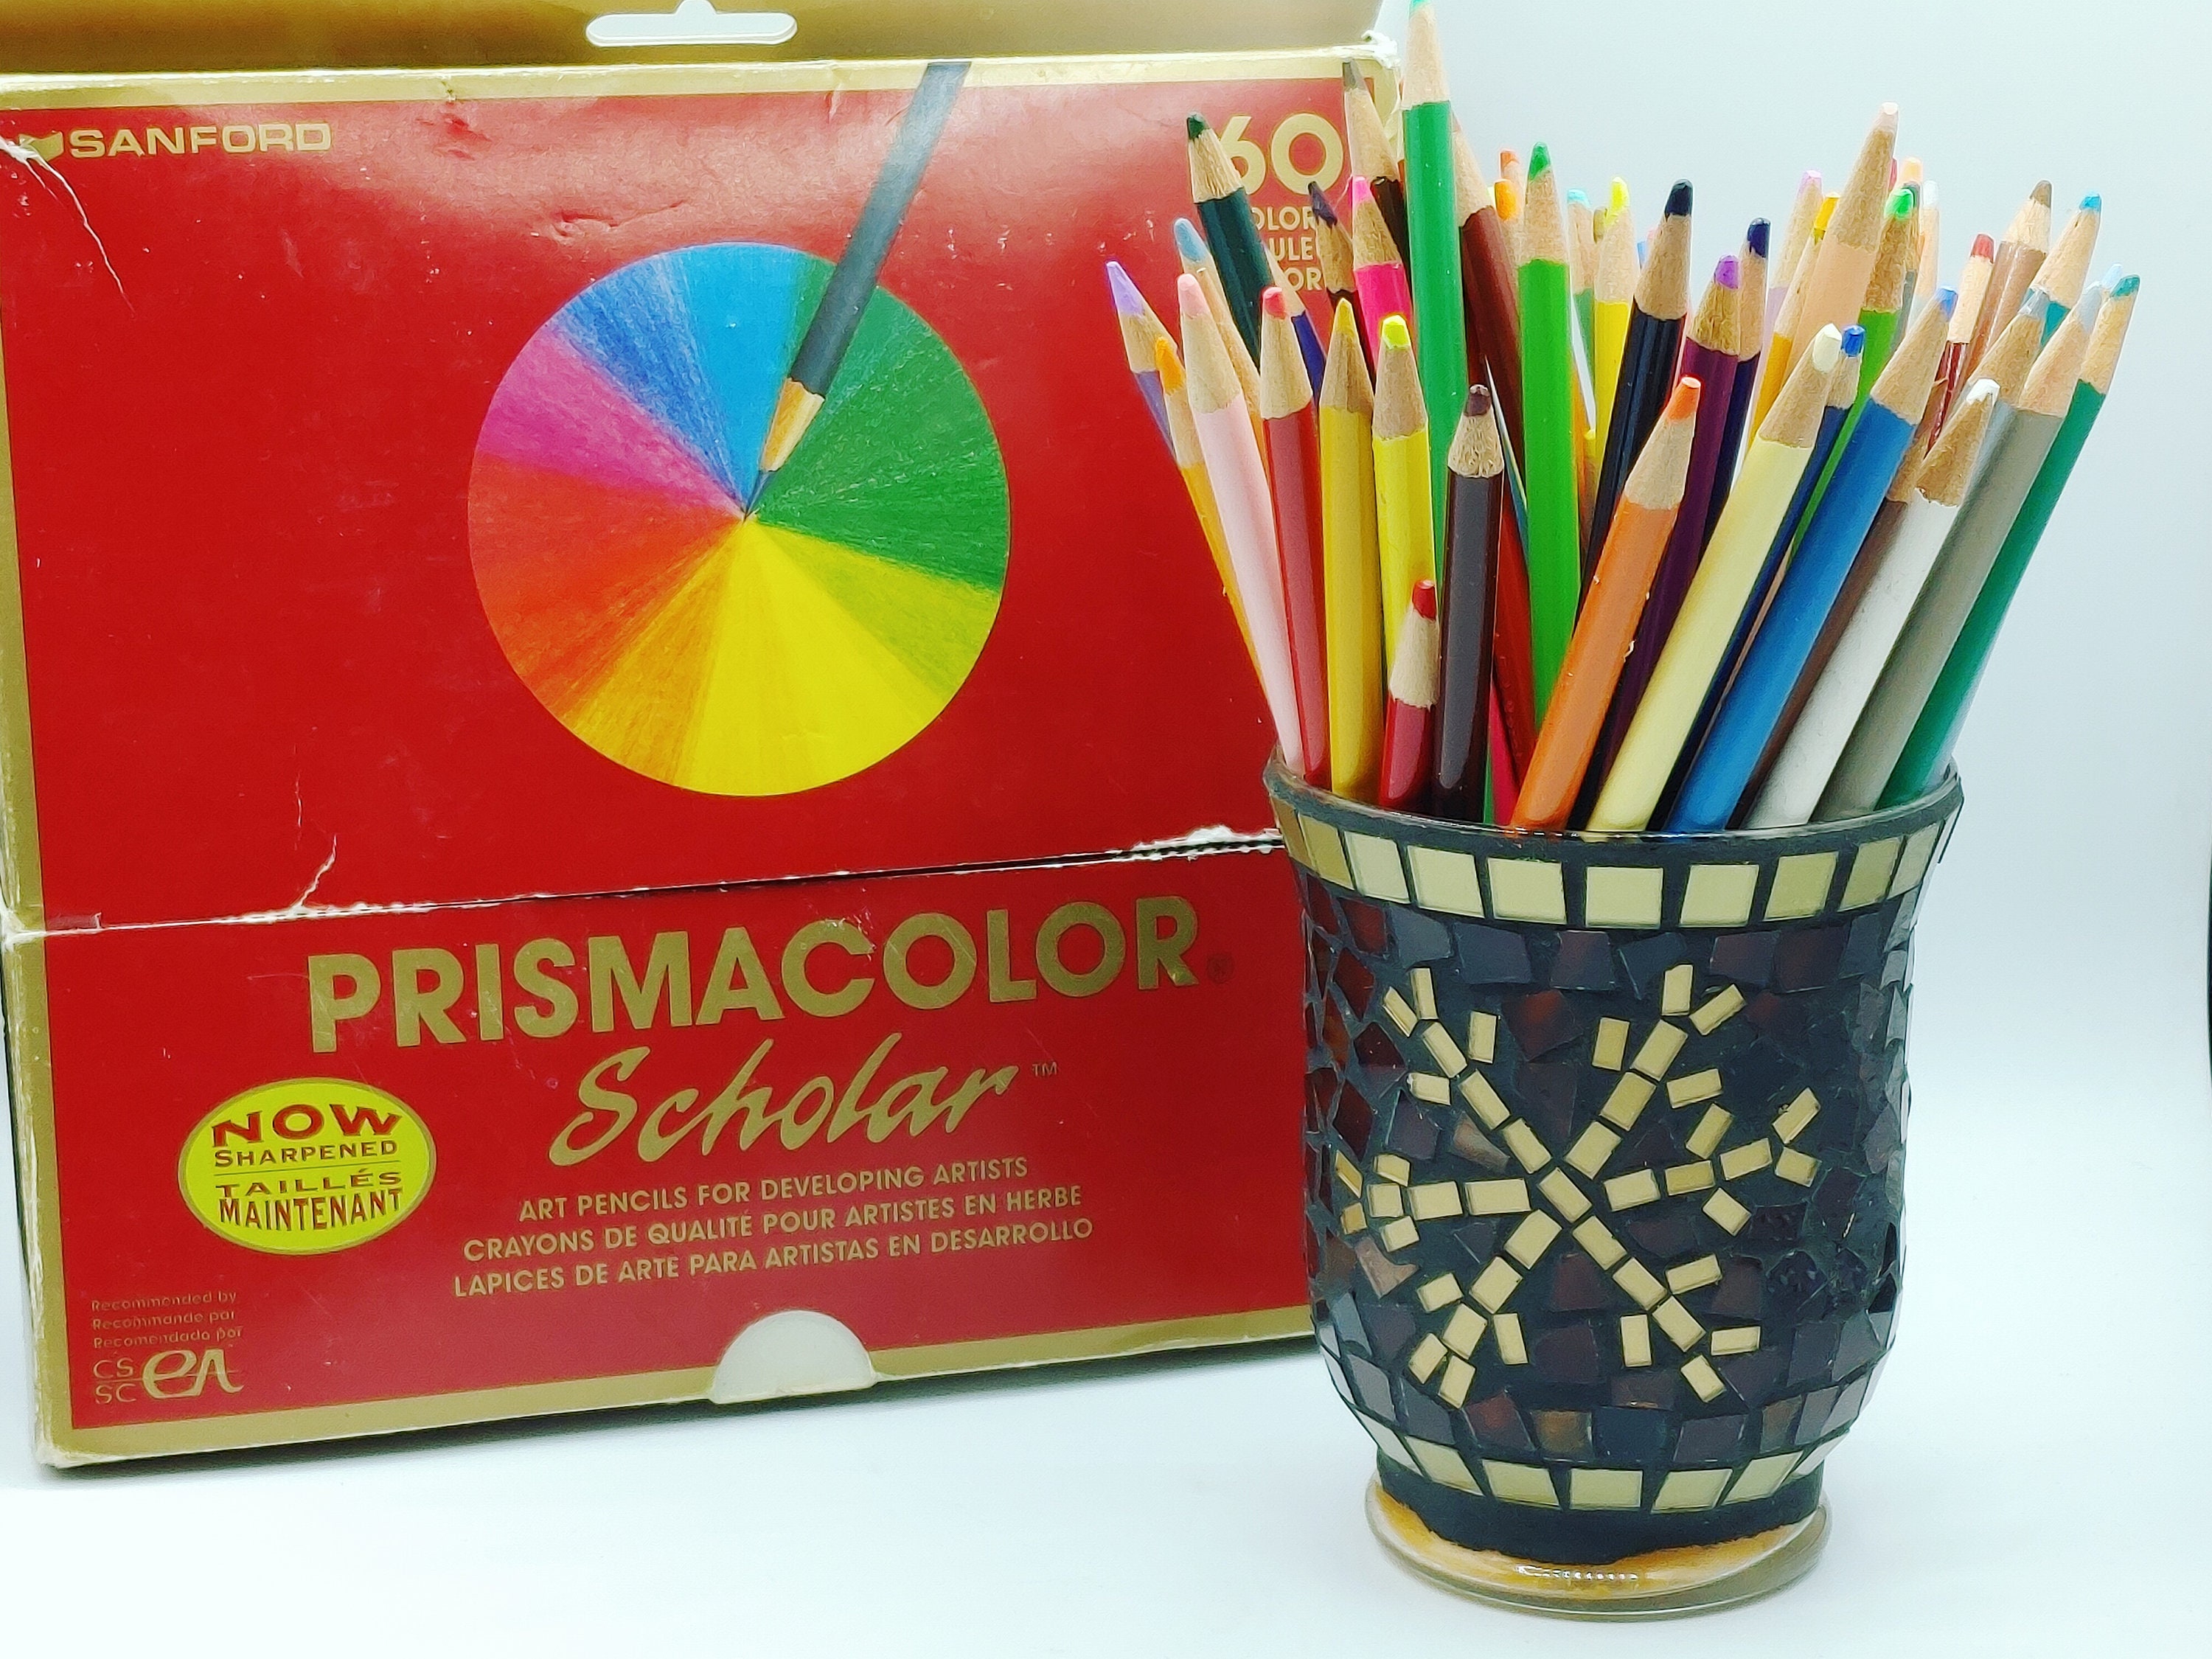 Pam's Cool Stuff for Raggedy Artists: Prismacolor Scholar Line